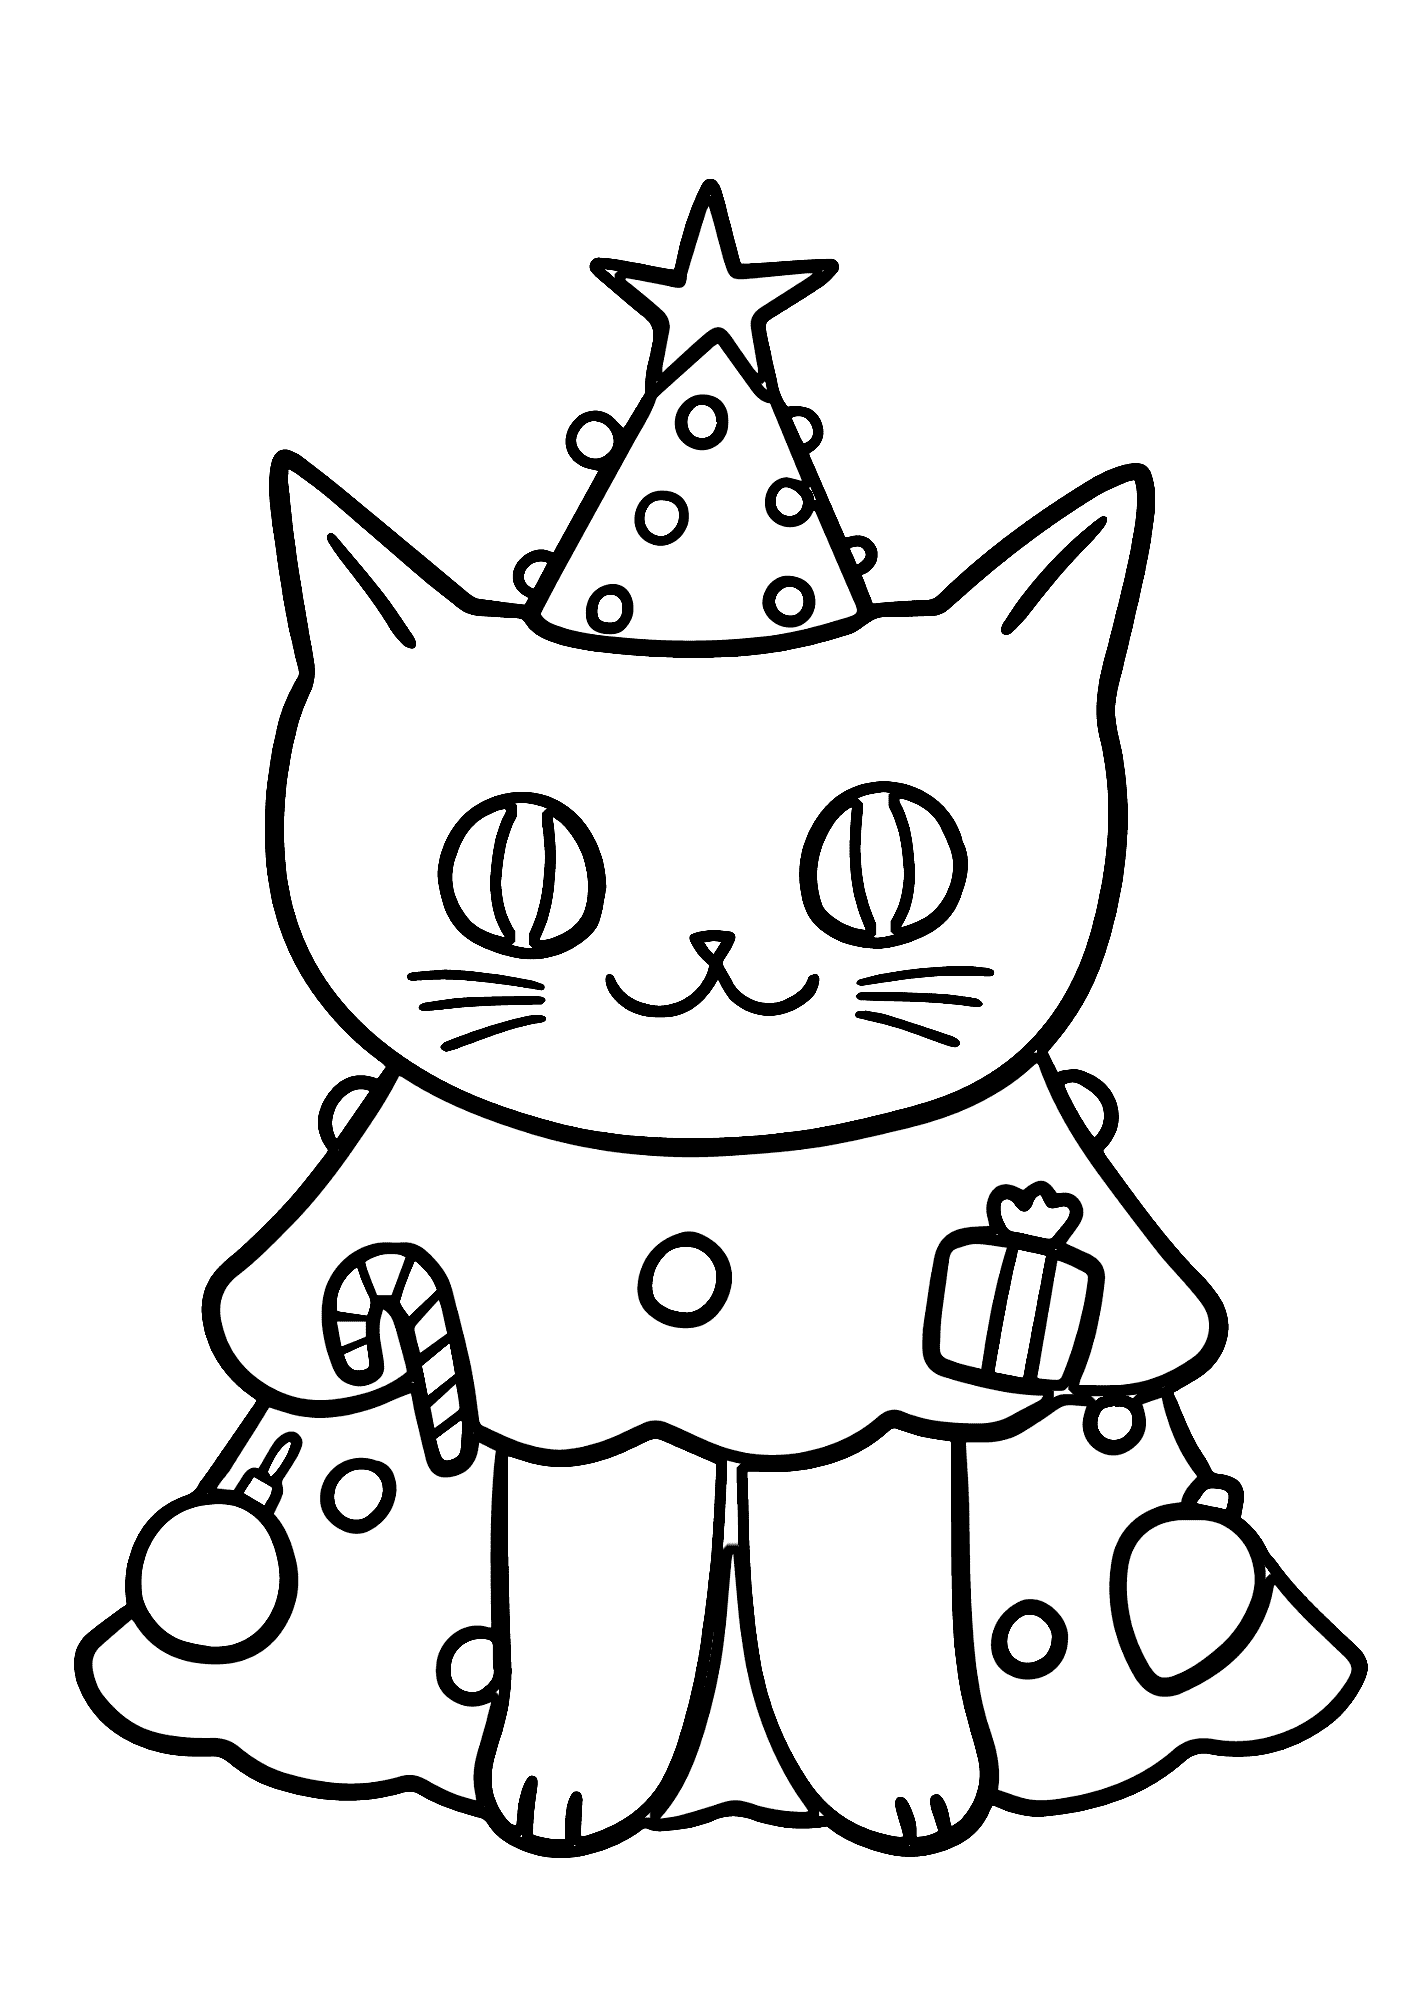 Cute Cat Christmas Tree Coloring Pages